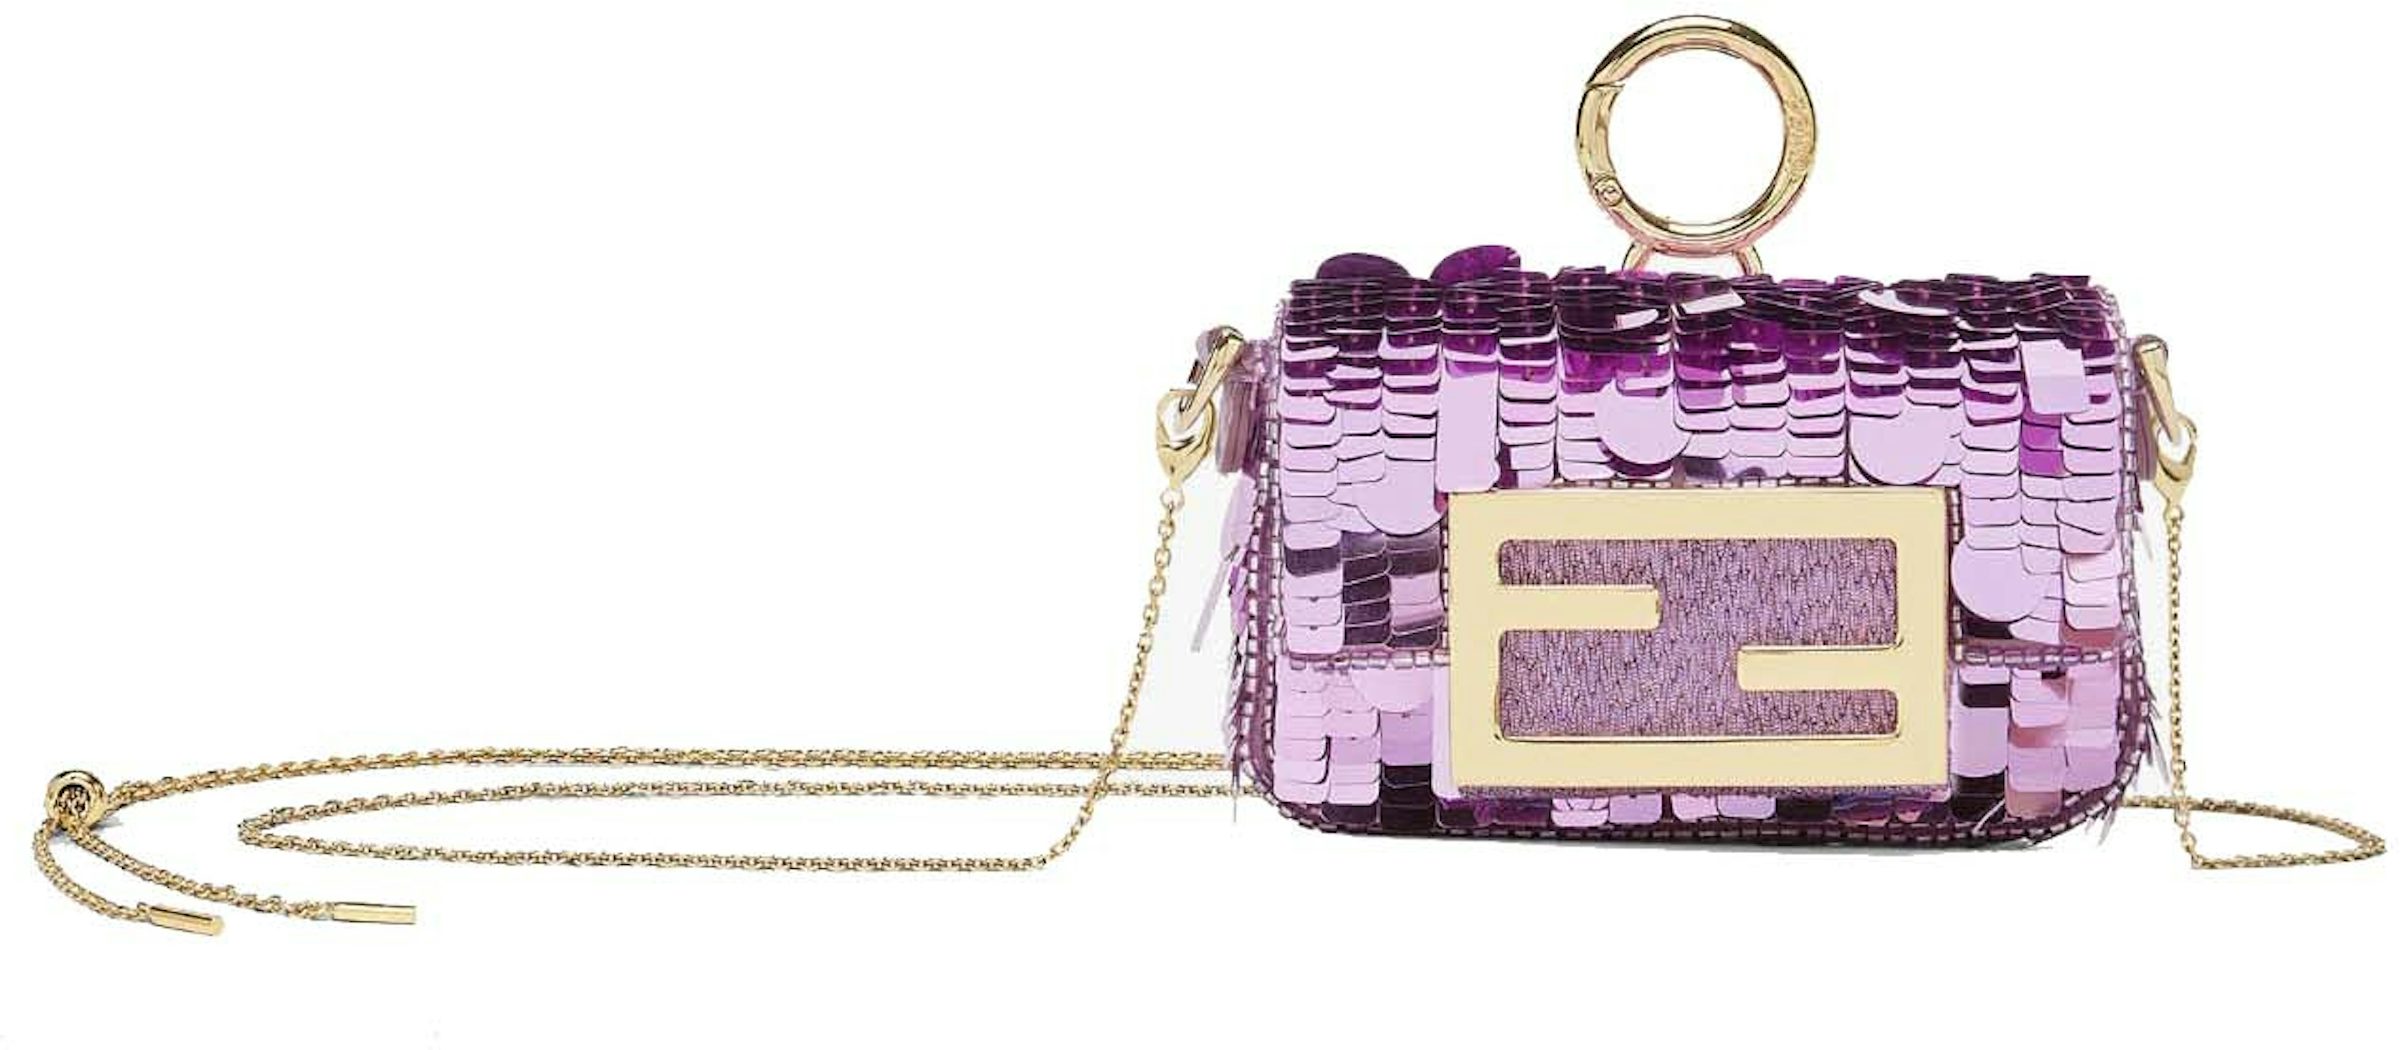 Baguette - Lilac sequin and leather bag